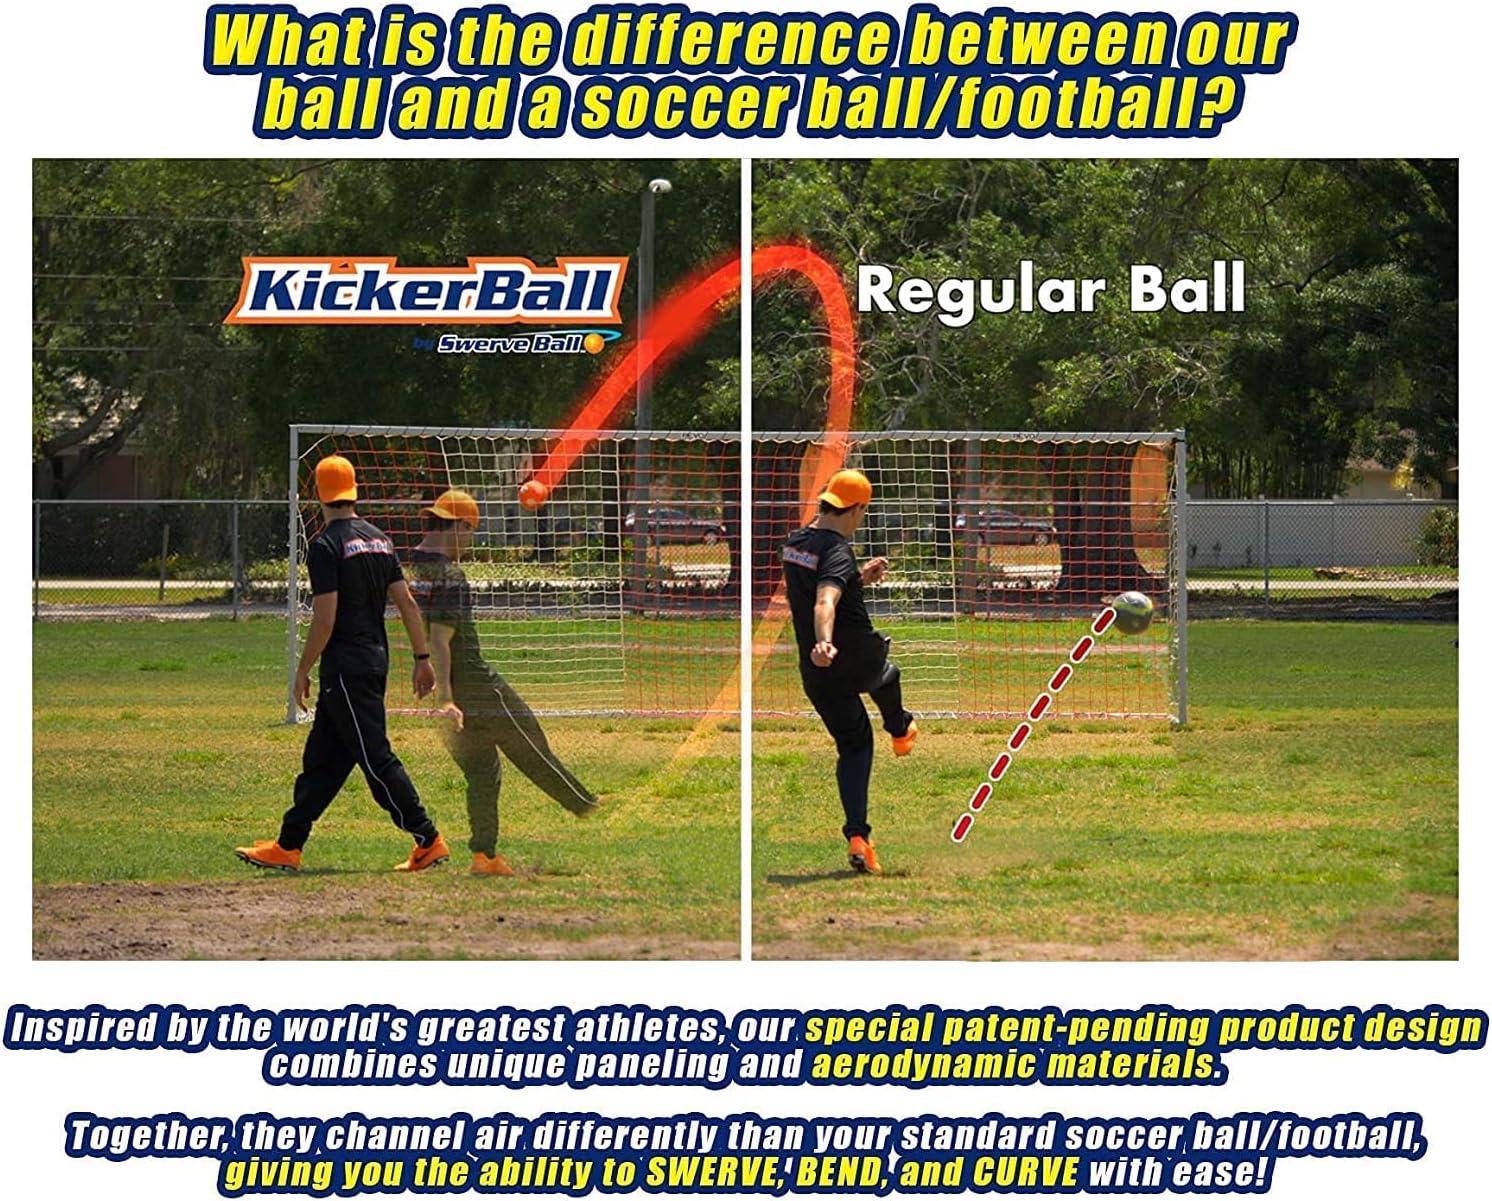 Kickerball - Curve and Swerve Soccer Ball/Football Toy - Kick Like The  Pros, Great Gift for Boys and Girls - Perfect for Outdoor & Indoor Match or  Game, Bring The World Cup